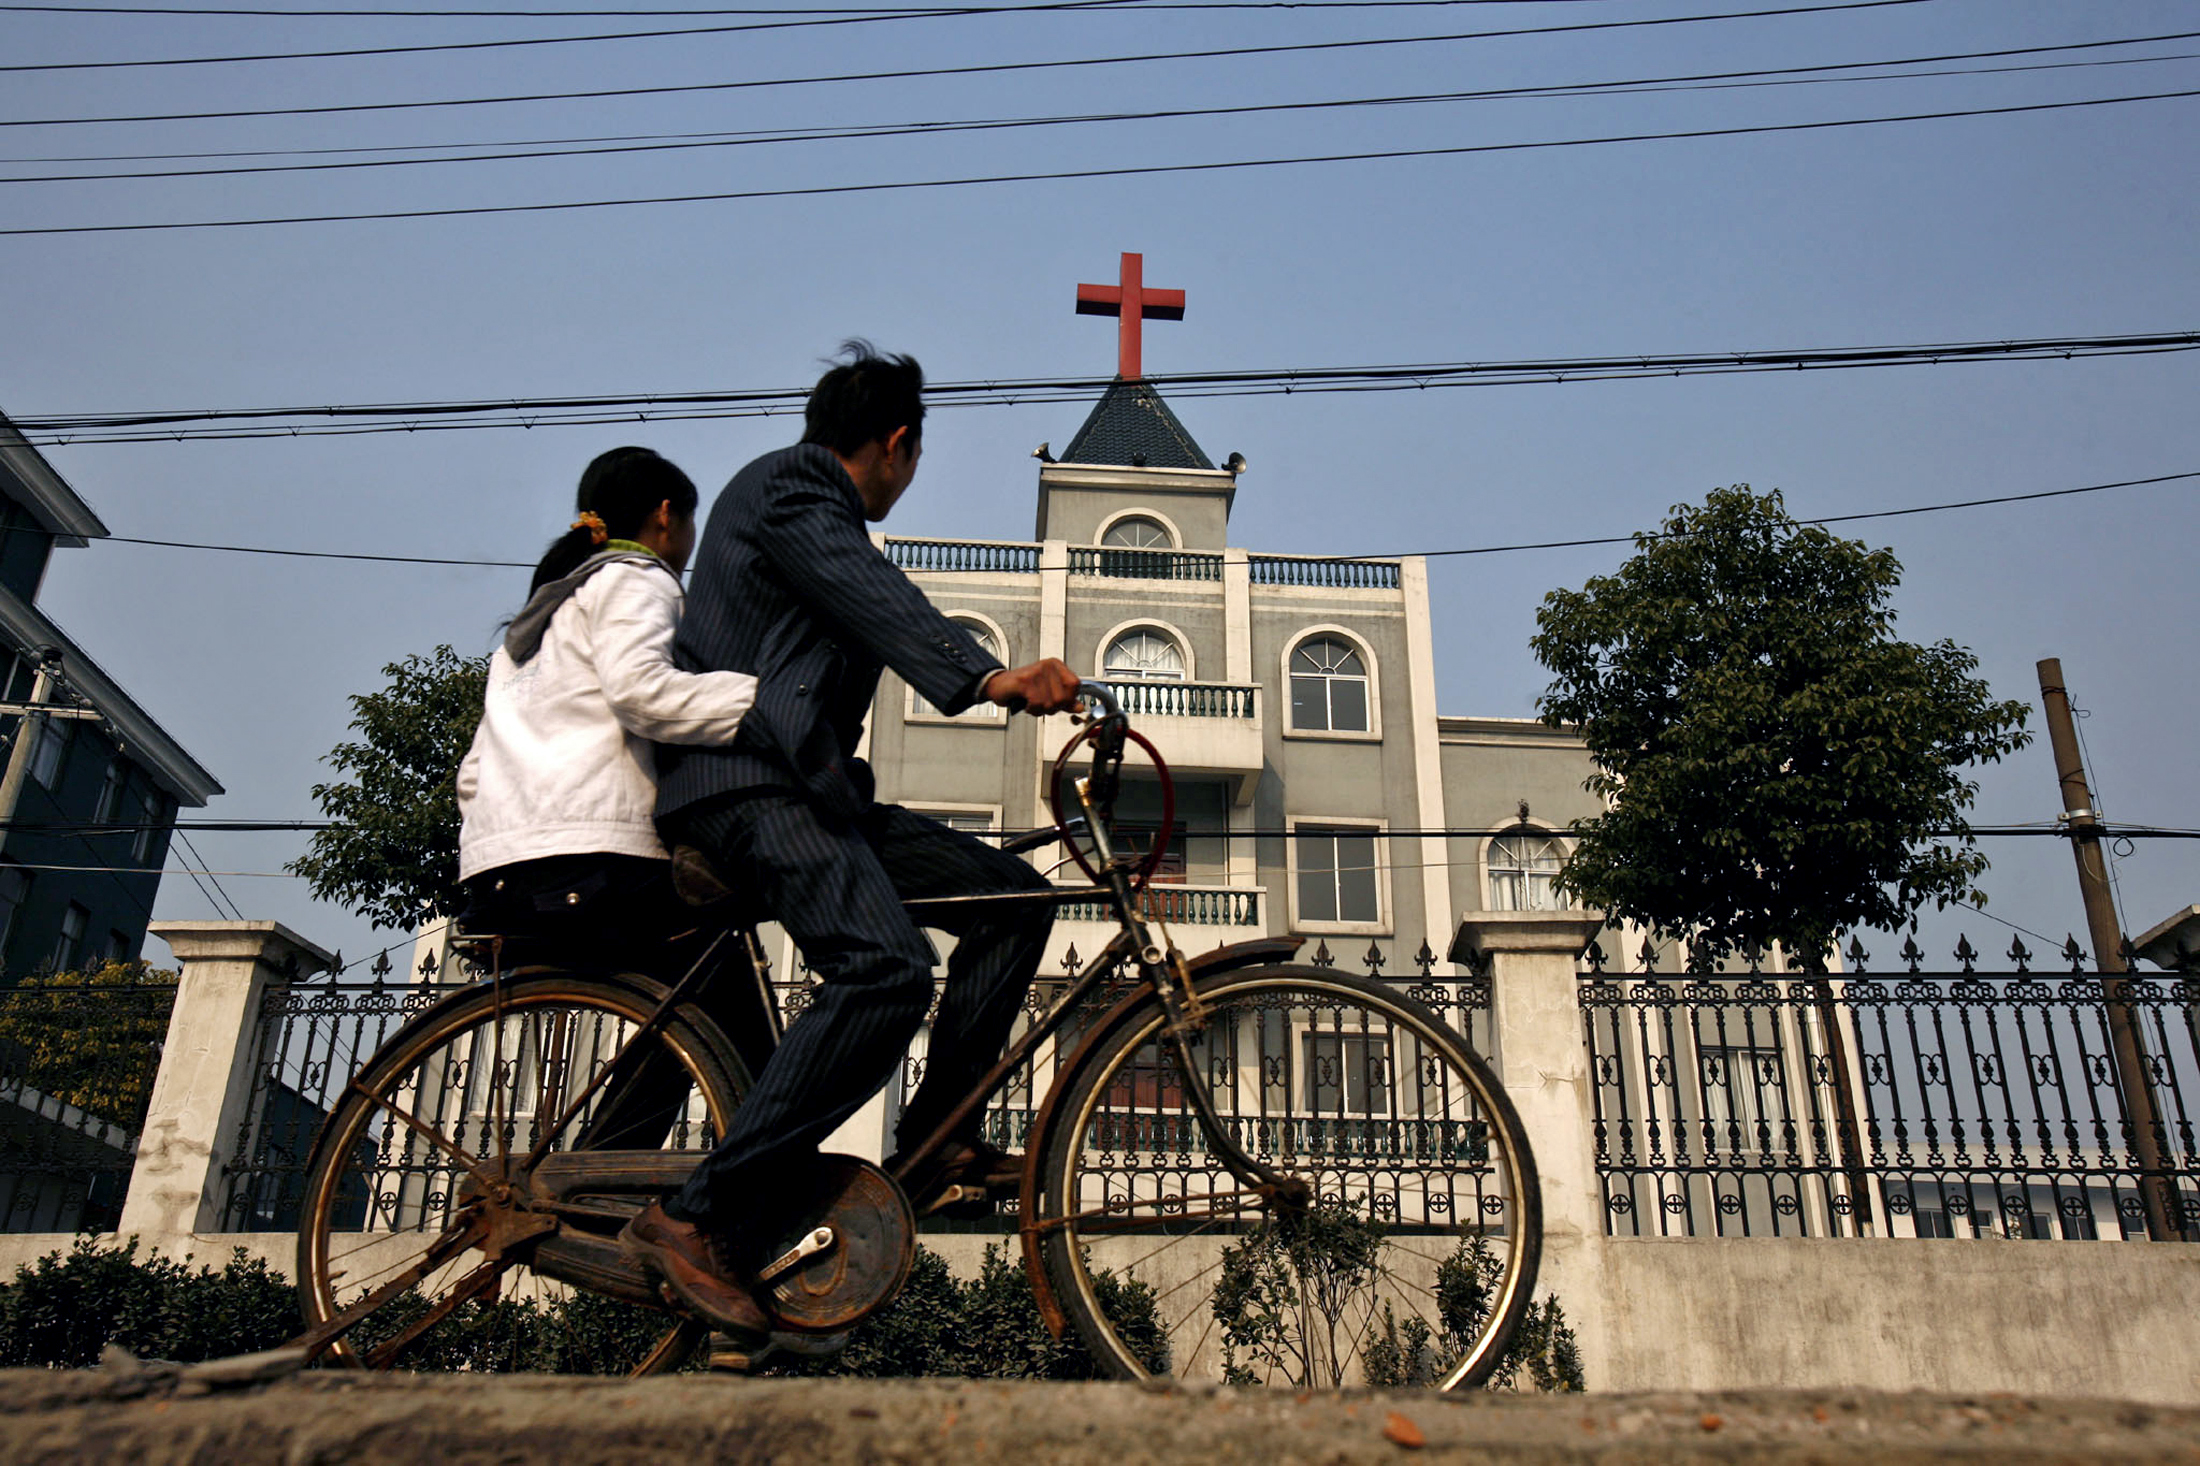 A local resident rides a bicycle past a church in Xiaoshan, a commercial suburb of Hangzhou, the capital of China's Zhejiang province, on Dec. 21, 2006 (Lang Lang—Reuters)